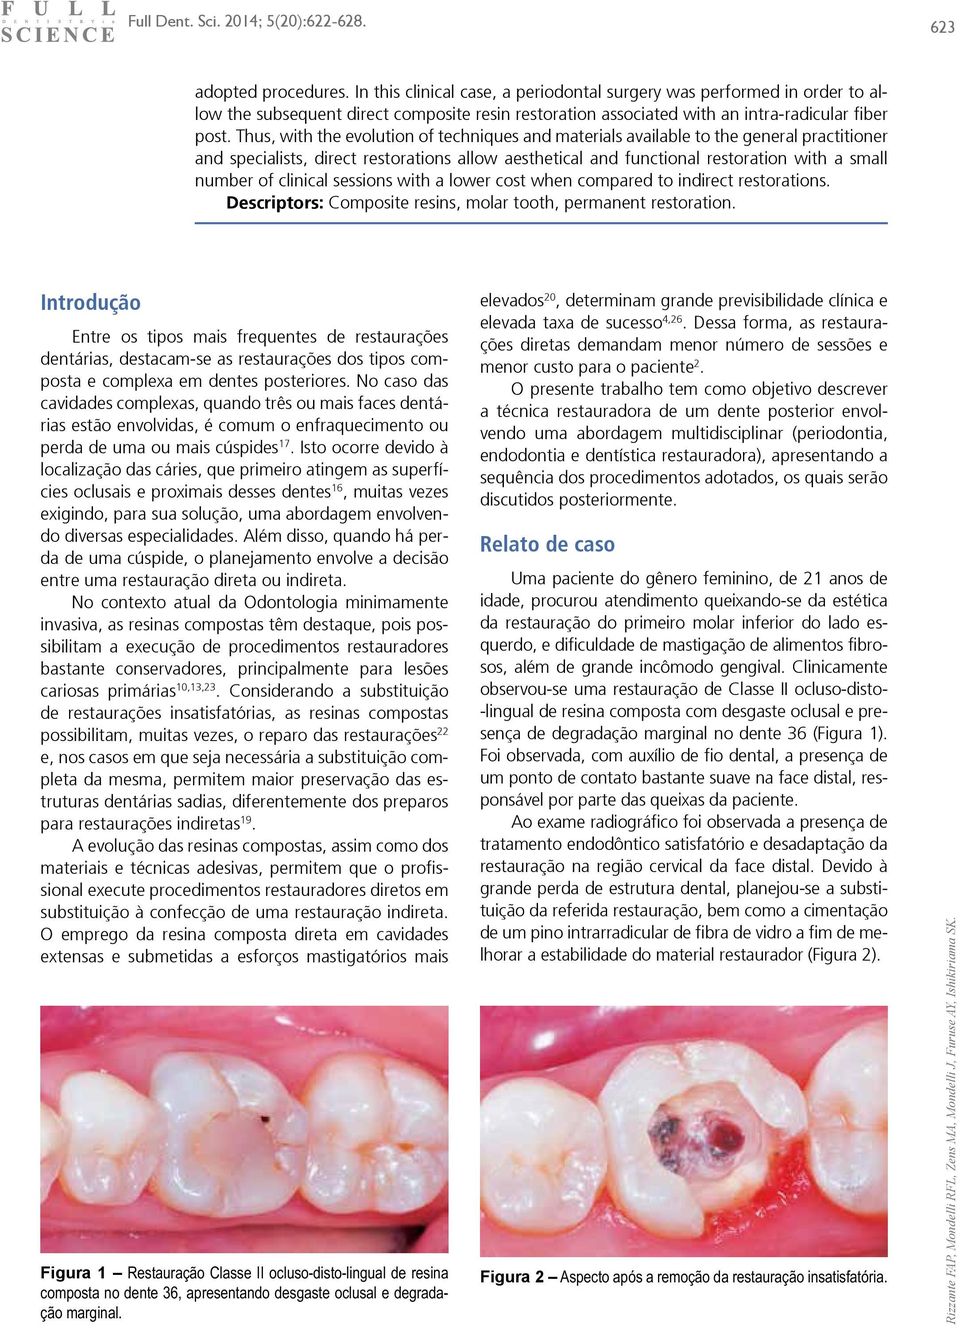 clinical sessions with a lower cost when compared to indirect restorations. Descriptors: Composite resins, molar tooth, permanent restoration.